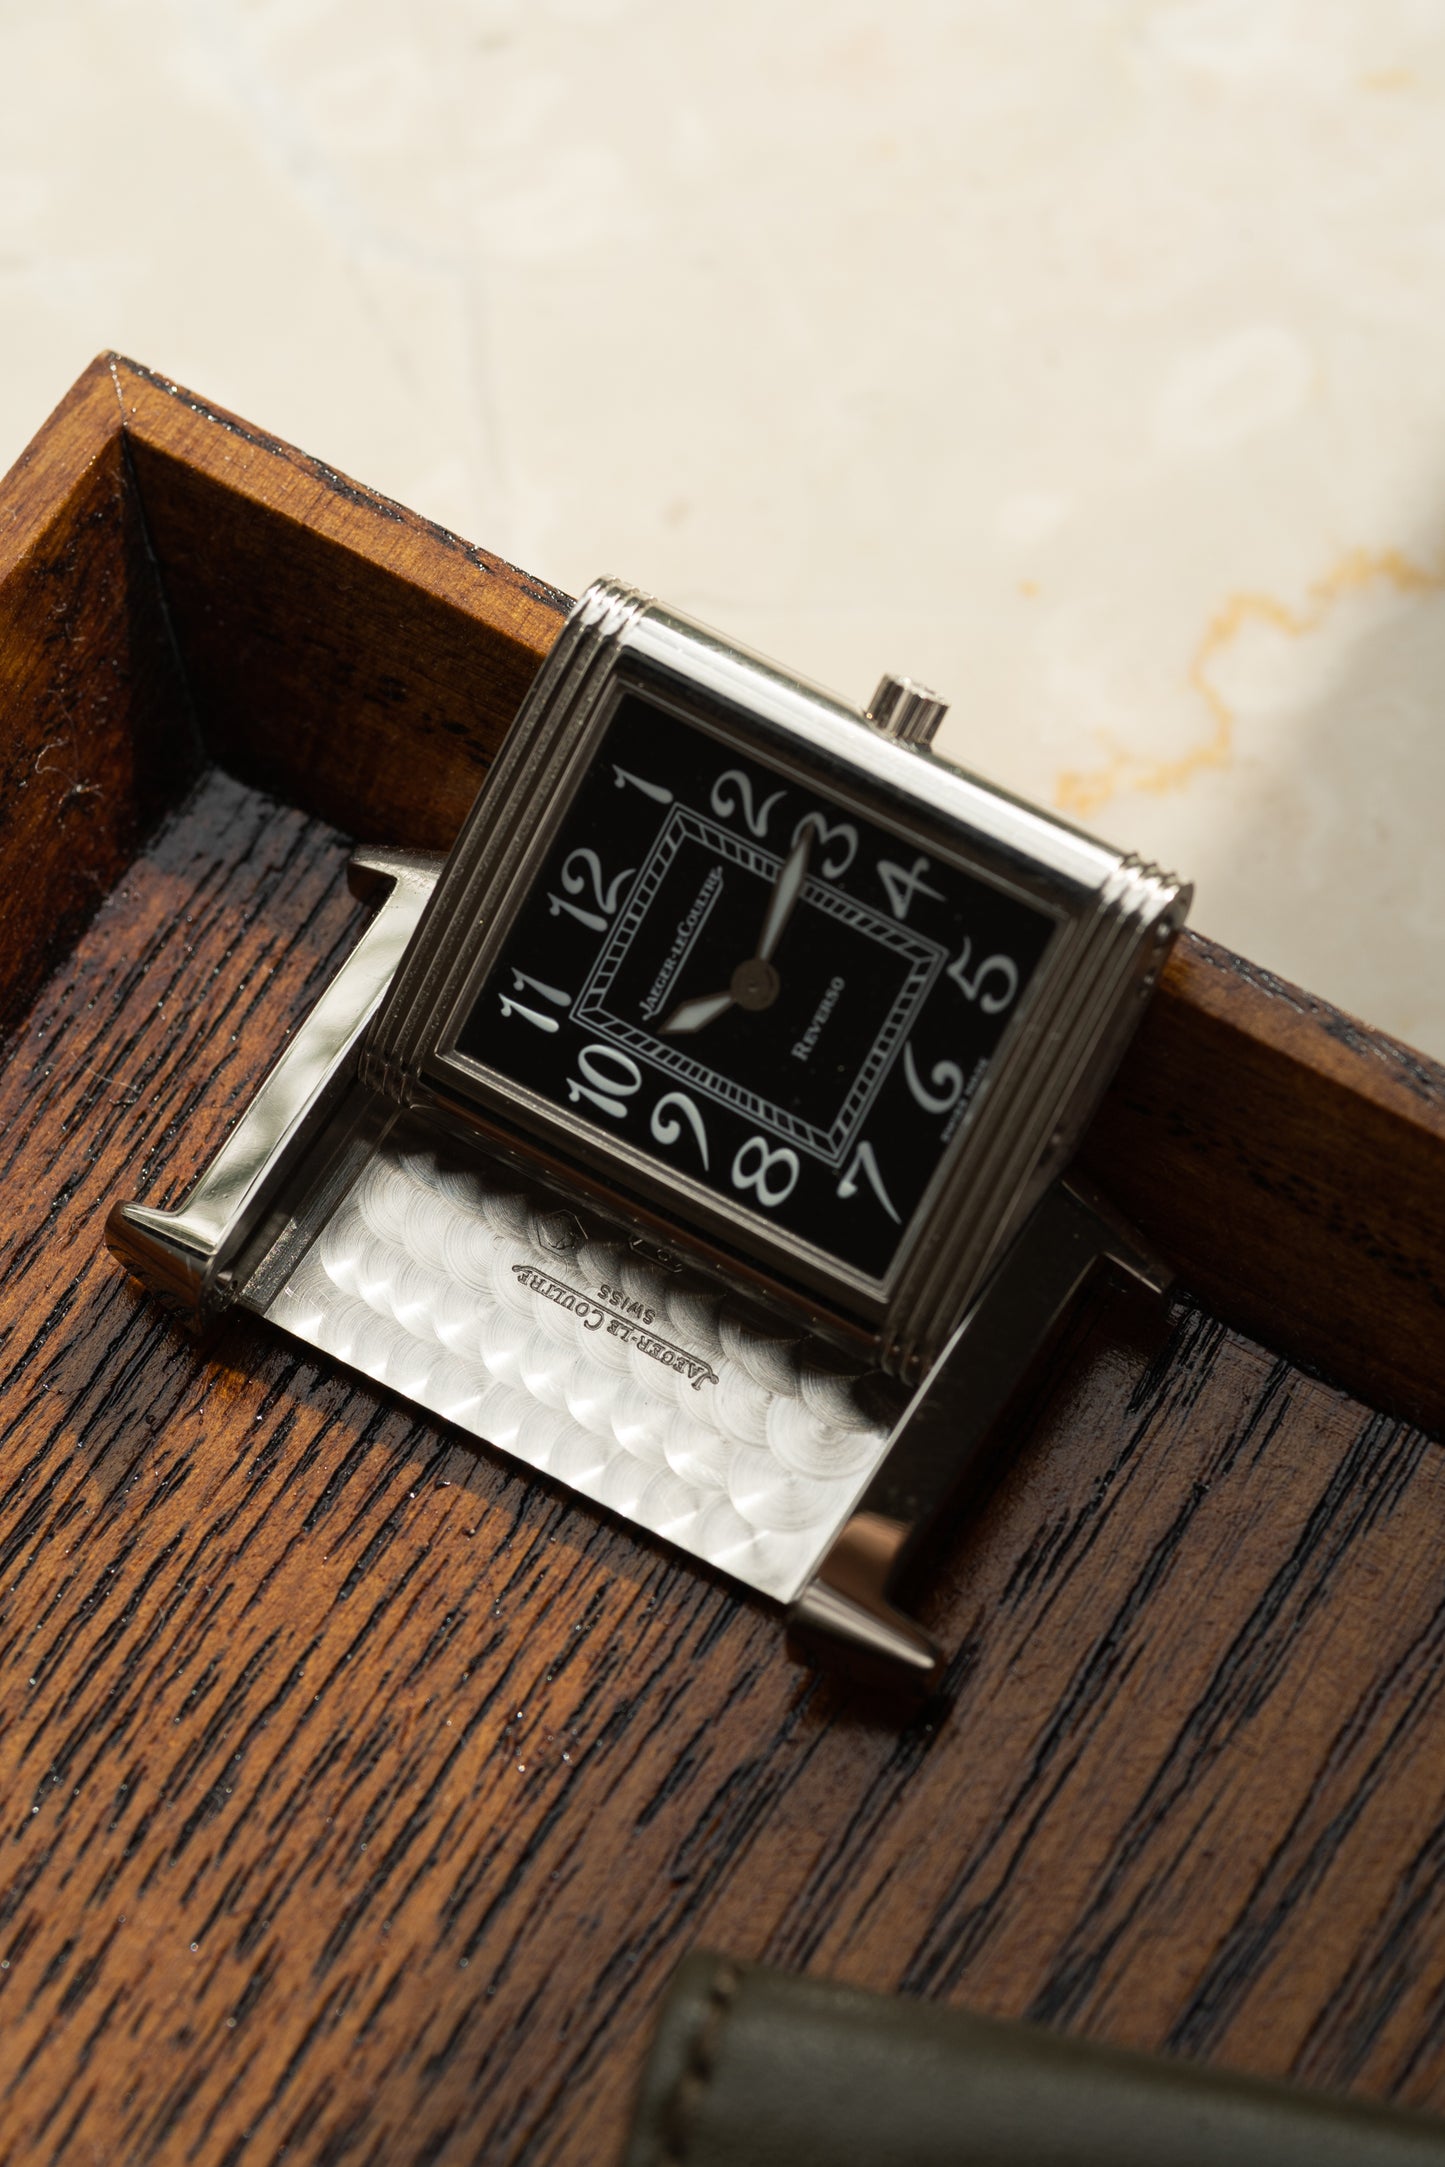 Jaeger-LeCoultre Reverso 250.3.86 in white gold from early 2000's